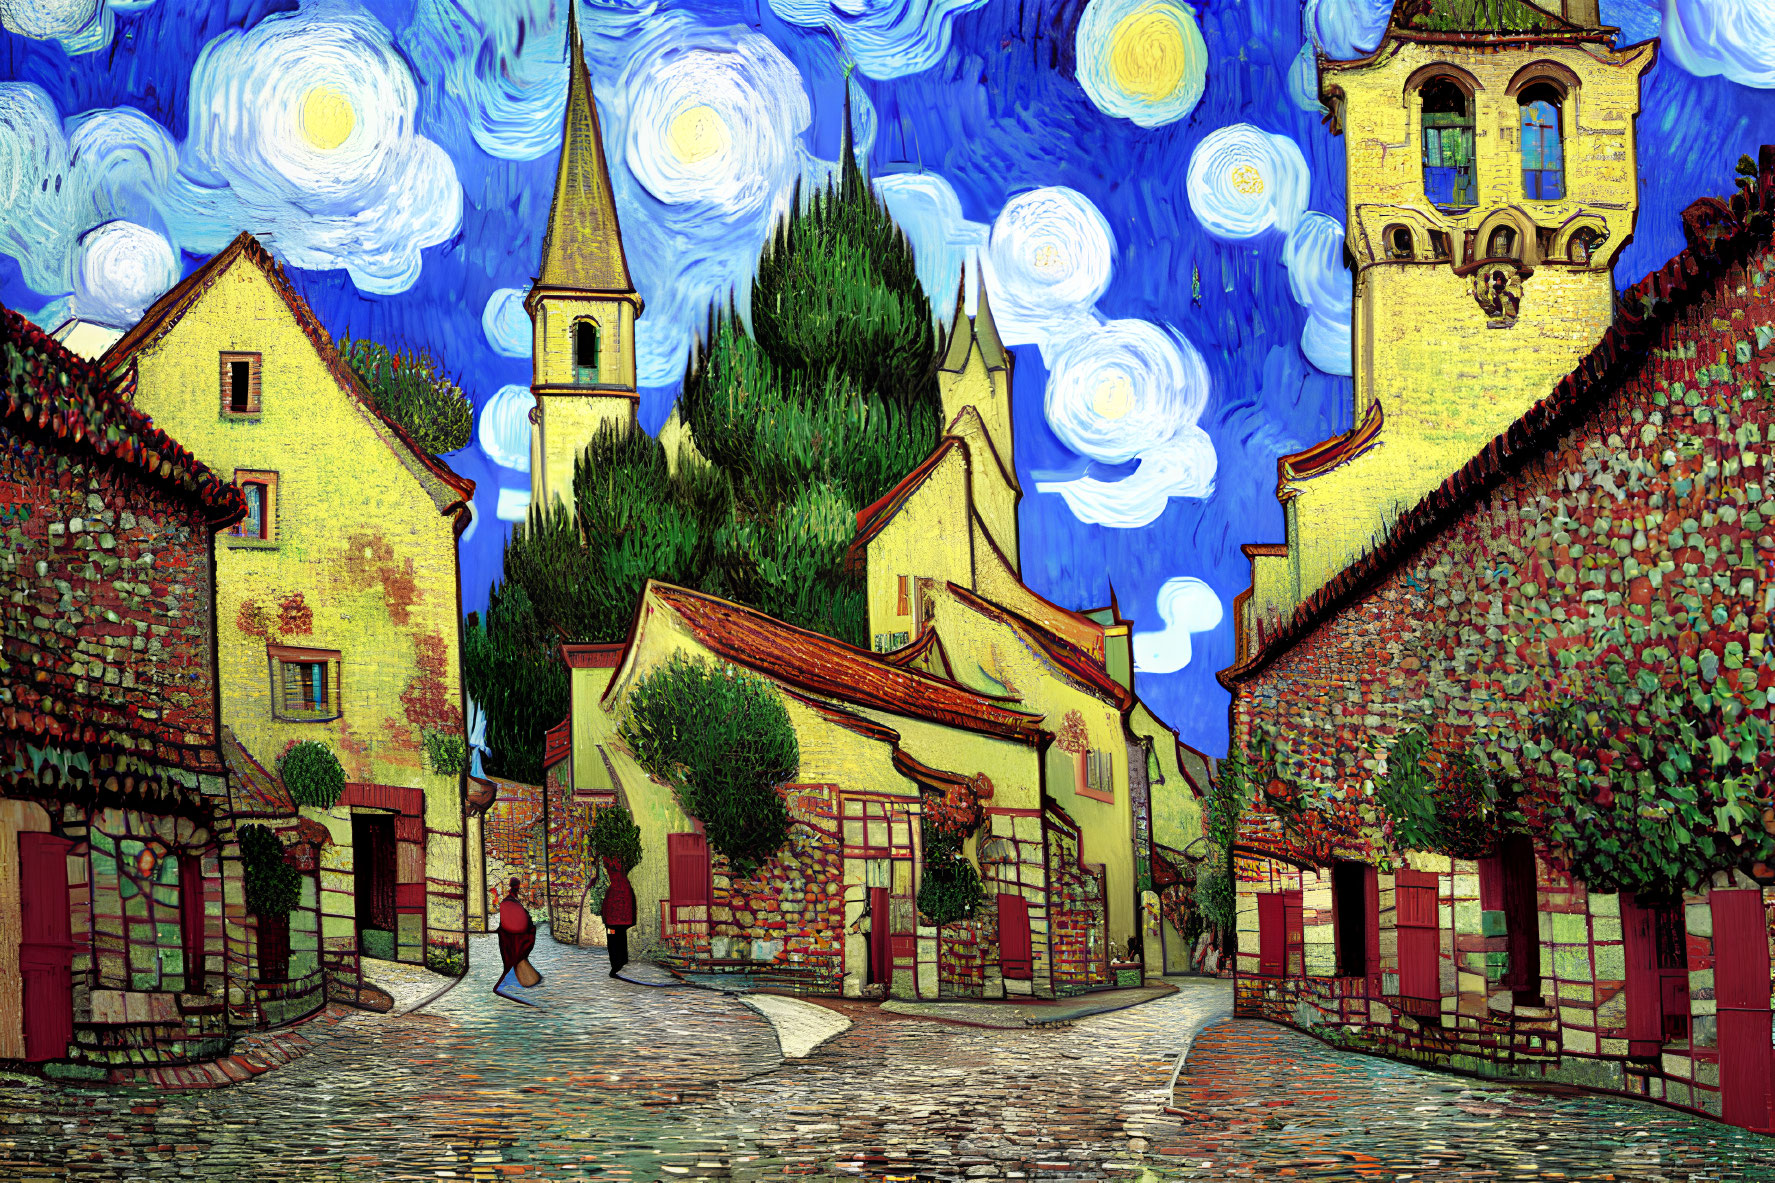 Vibrant starry night scene of a quaint village with swirl-patterned sky, cobbled streets